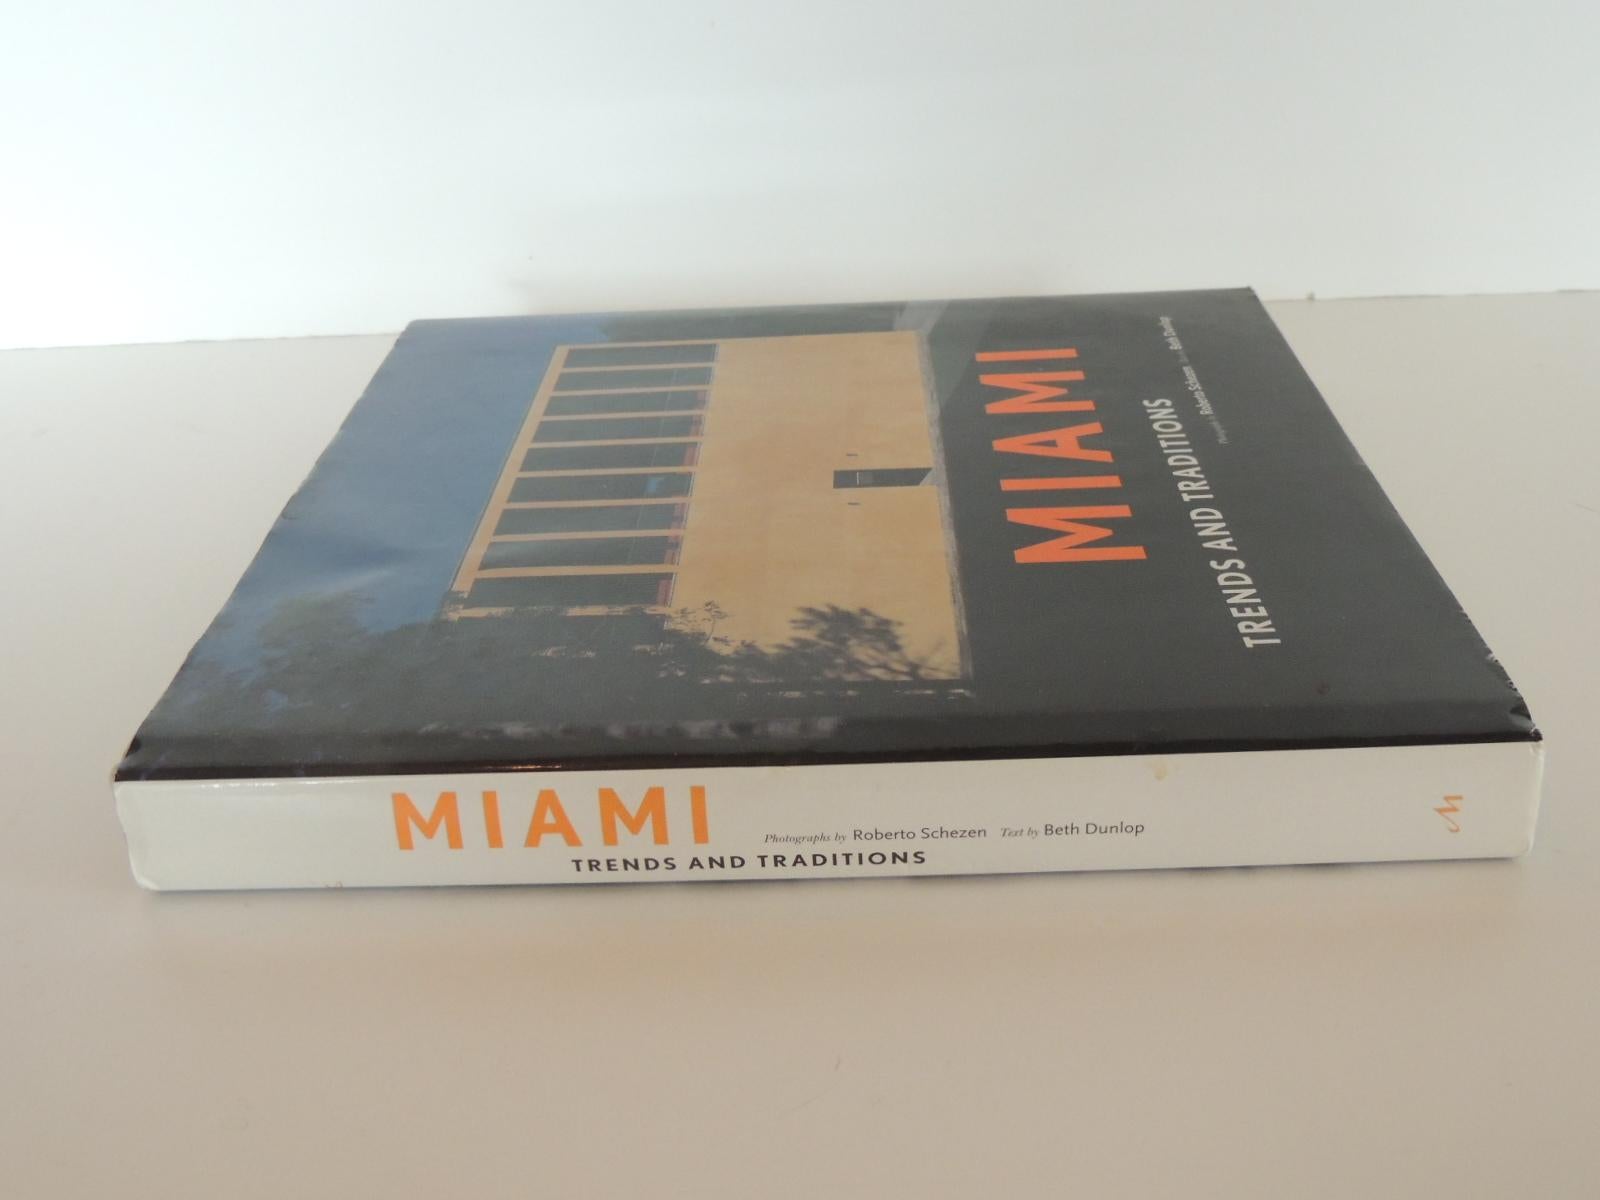 Miami Trends and traditions hard-cover vintage coffee table book by Monacelli Press, 1996.
This beautiful volume documents the pioneering architecture & spectacular interiors of the exciting metropolis of Miami, Florida. Explores Miami s great